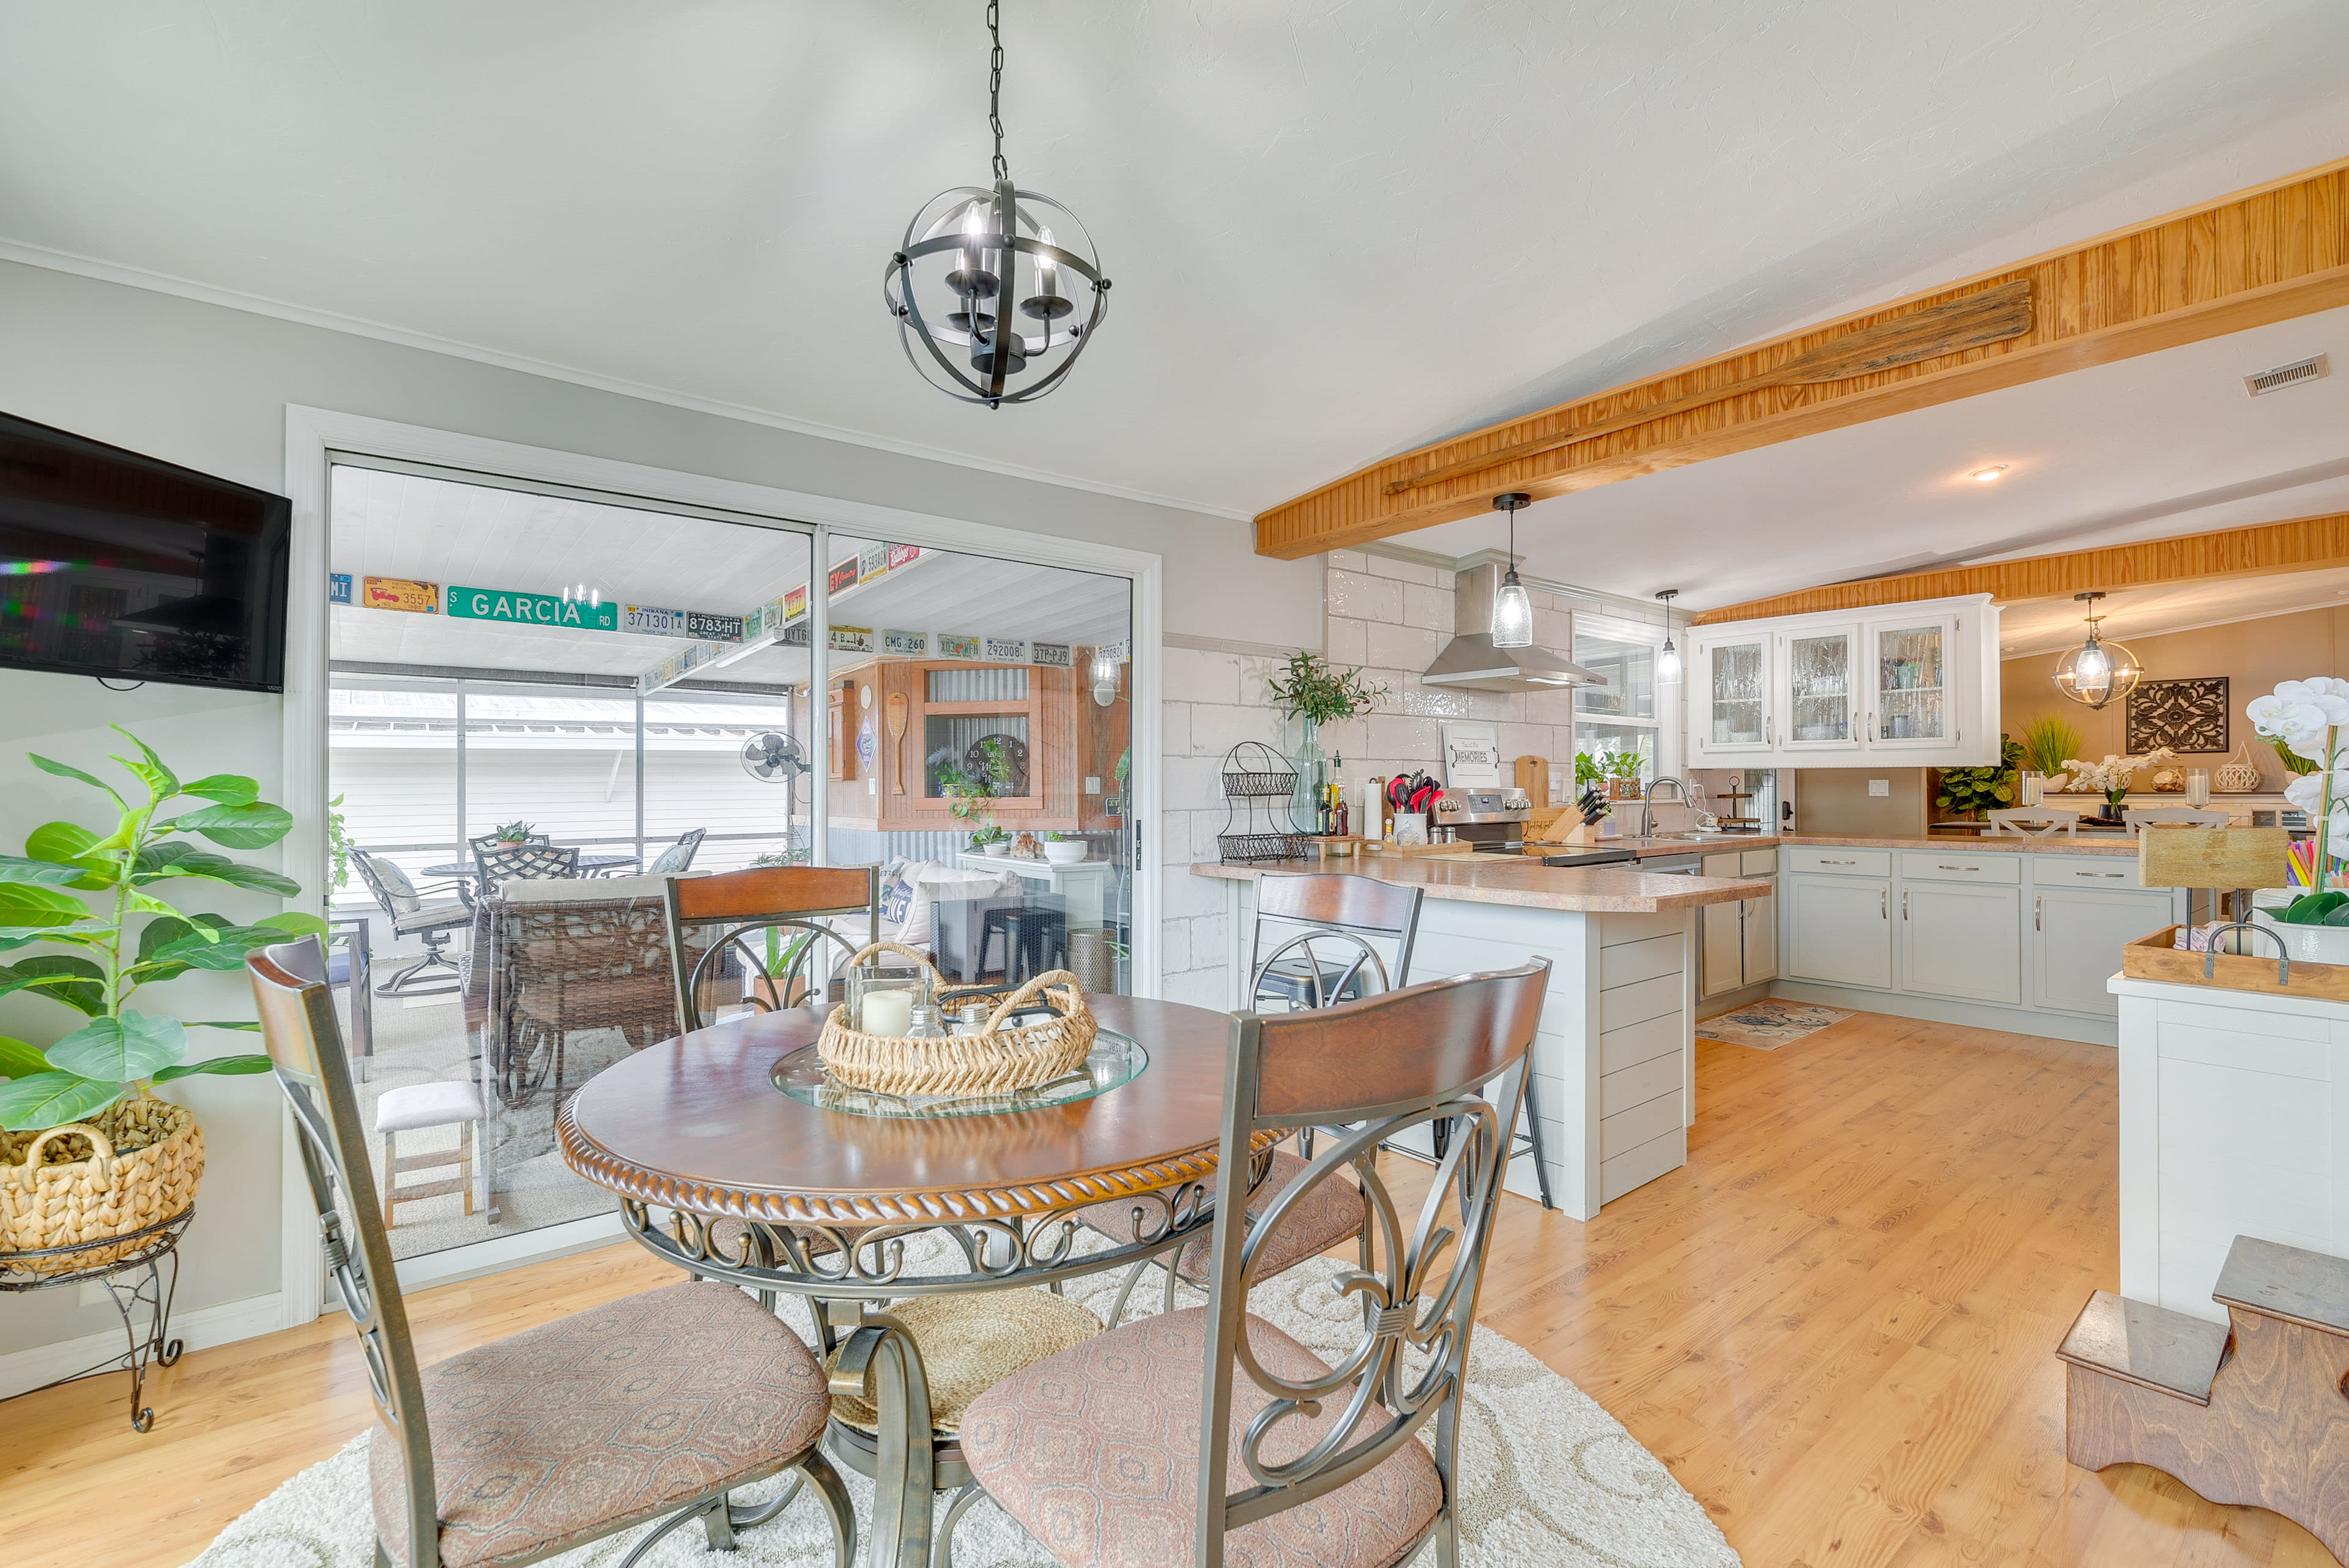 Additional Dining Area | Smart TV | Screened Porch Access